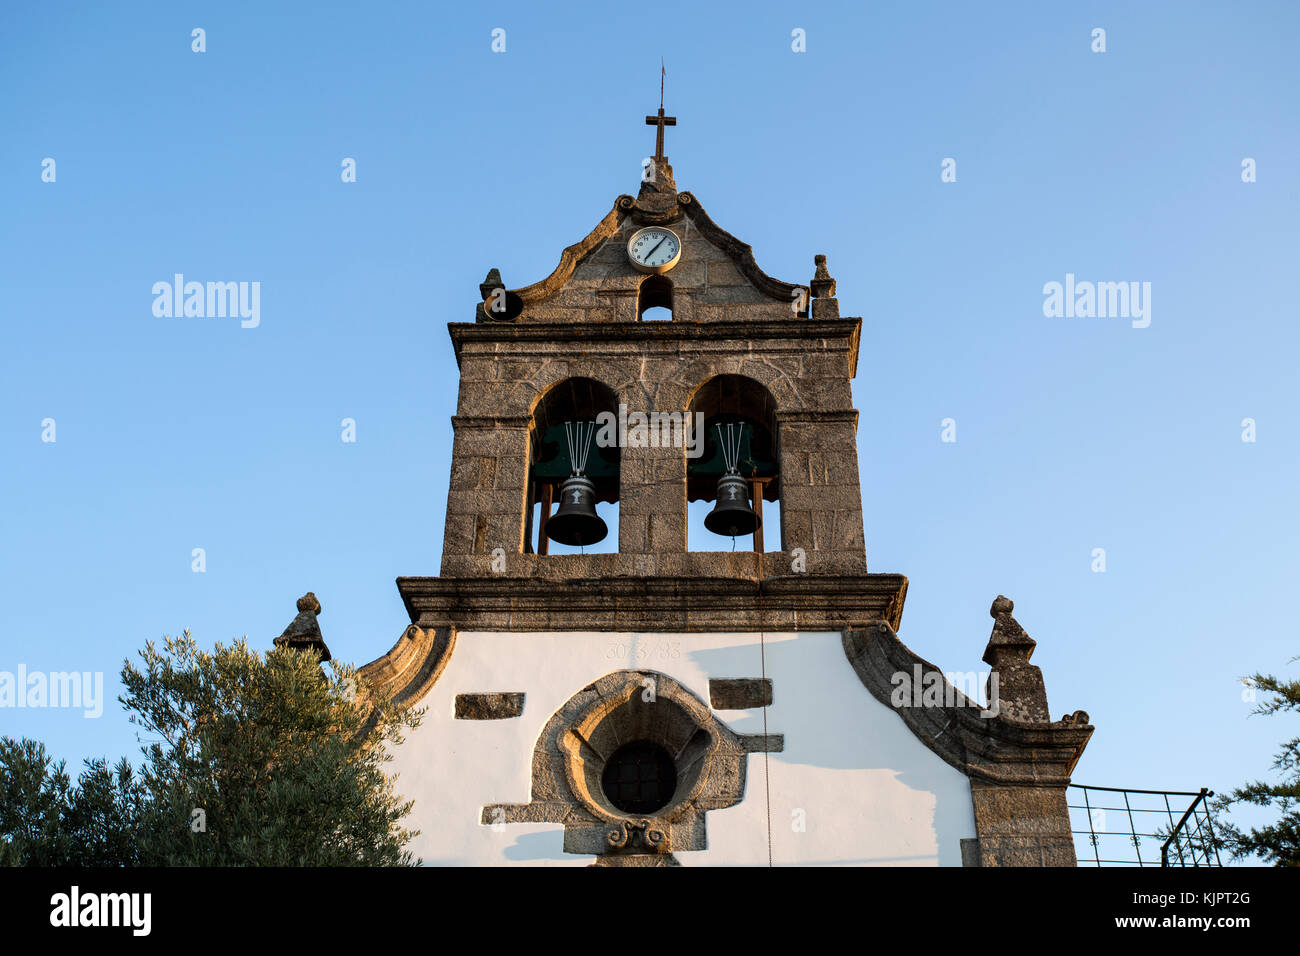 Parish church of Sao Romao with double bells, clock and cross on top of a truncated gable, in Bacal, Braganca, Portugal Stock Photo